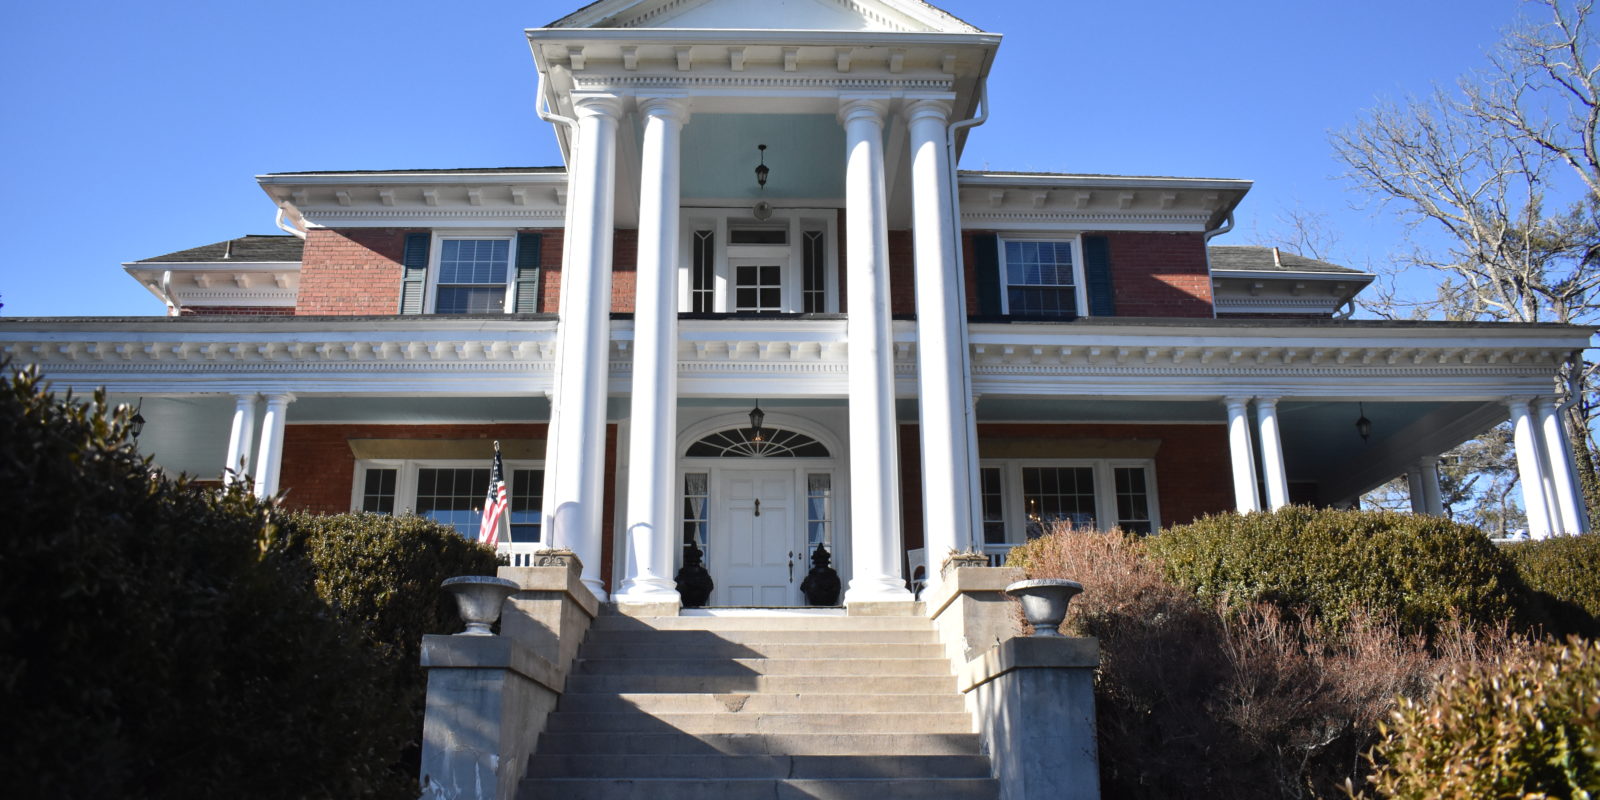 Exterior of front of historic brick building, front stairs lead up to white front door flanked by tall columns